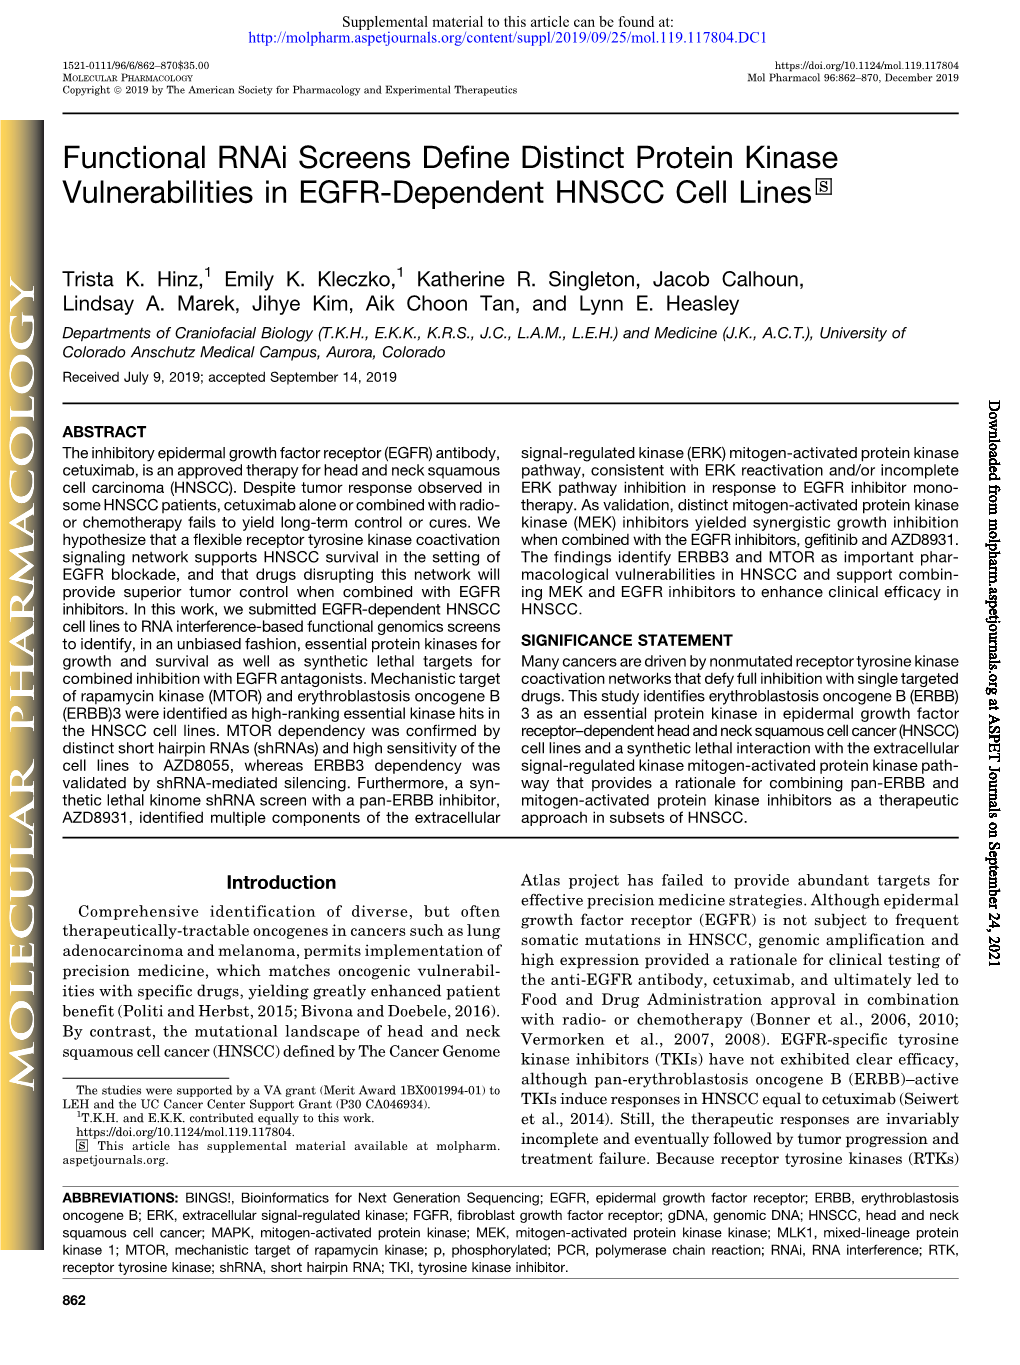 Functional Rnai Screens Define Distinct Protein Kinase Vulnerabilities in EGFR-Dependent HNSCC Cell Lines S